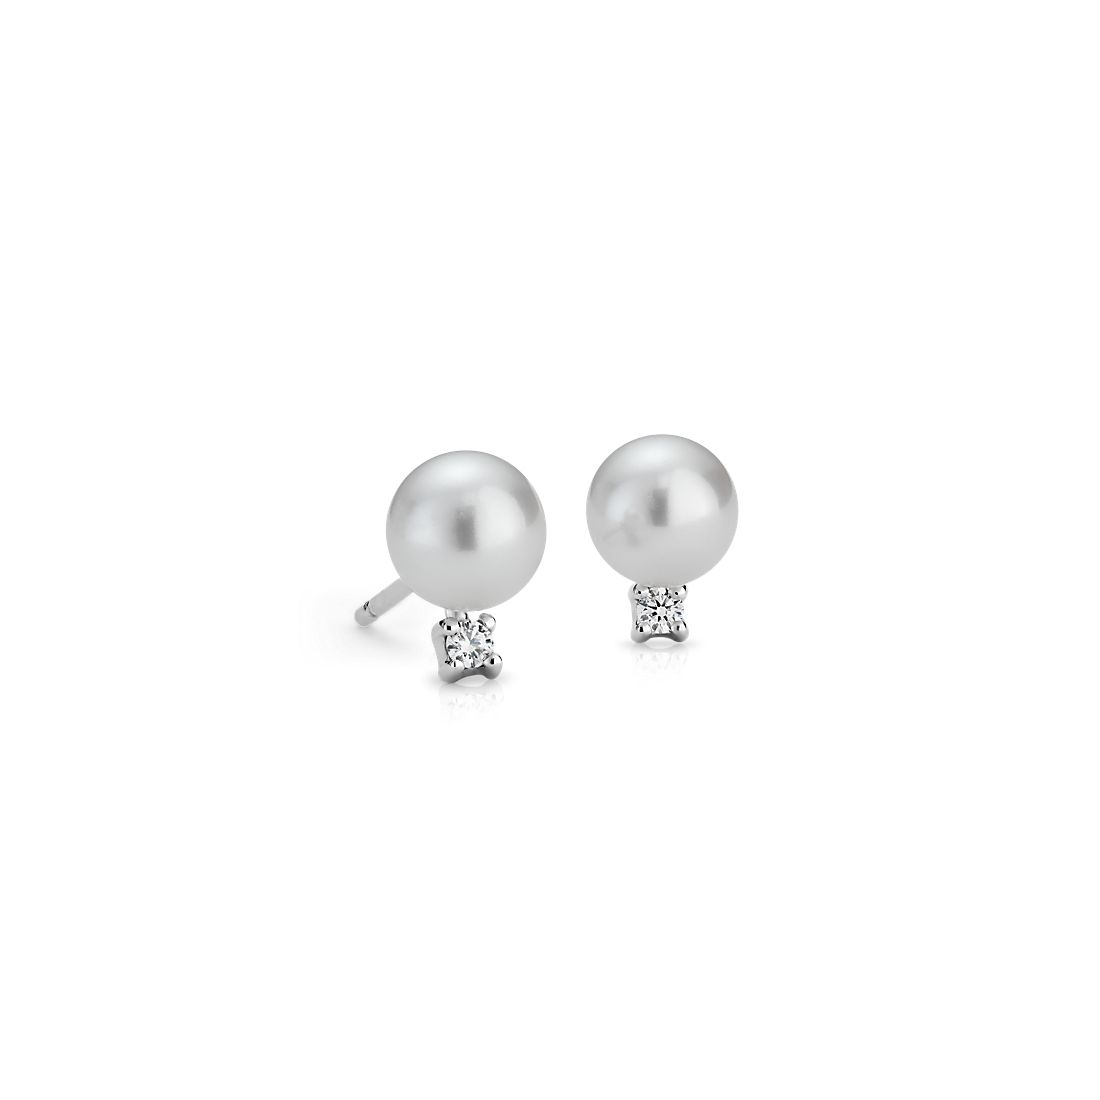 Freshwater Cultured Pearl and Diamond Stud Earrings in 14k White Gold